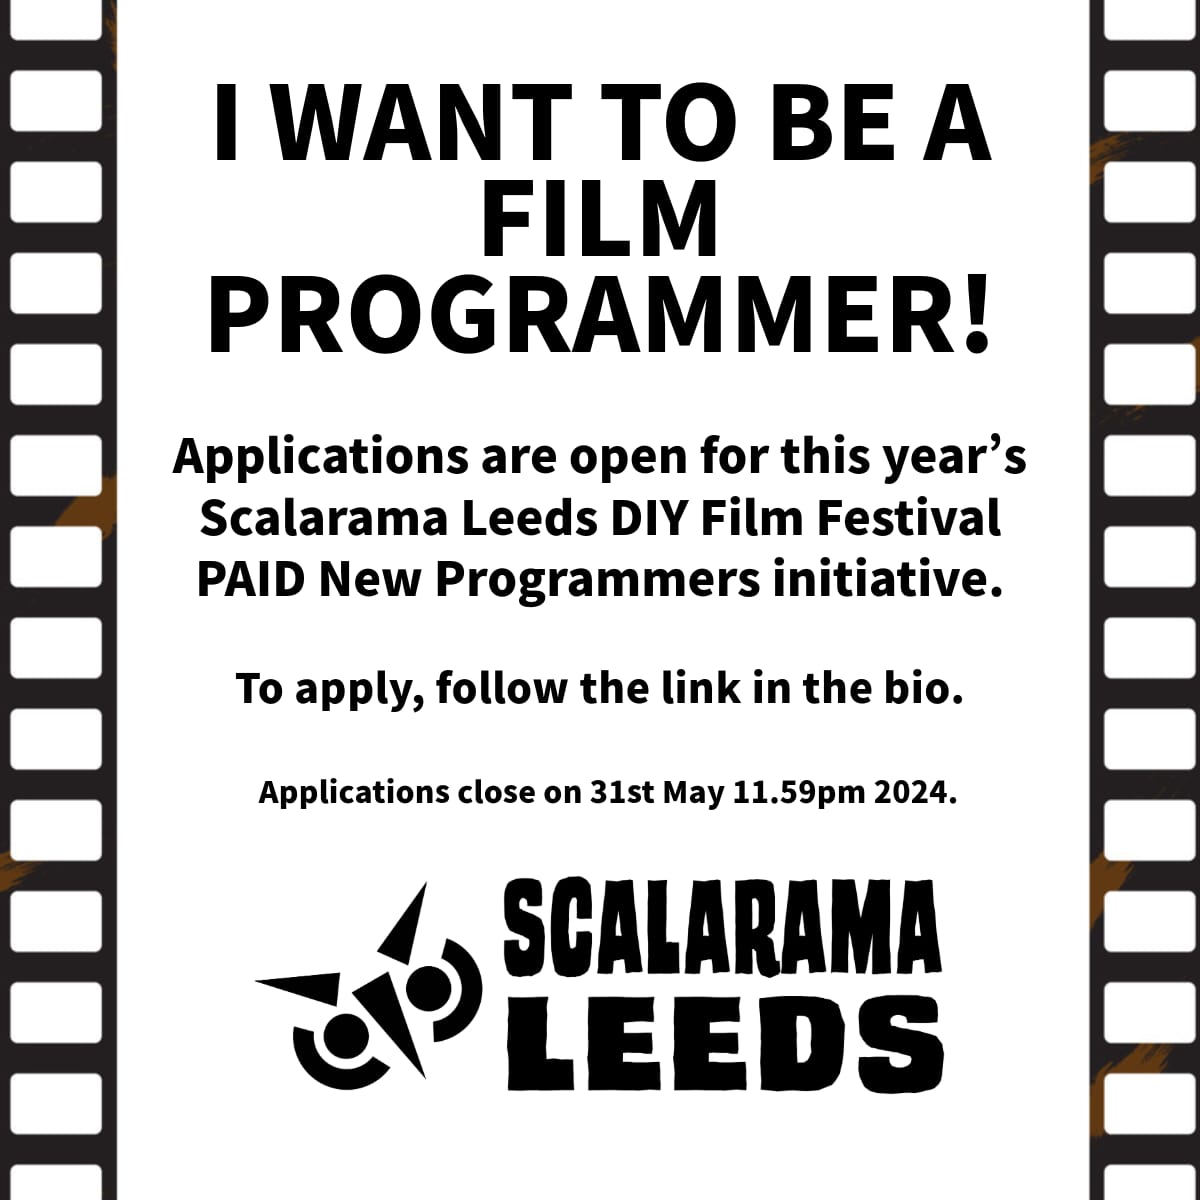 📢 Big announcement - applications for our new programmers initiative are open! This is a PAID initiative aimed at supporting first-time film programmers to develop & showcase their ideas at our DIY film festival in September this year! Apply here ⬇️ docs.google.com/forms/d/e/1FAI…